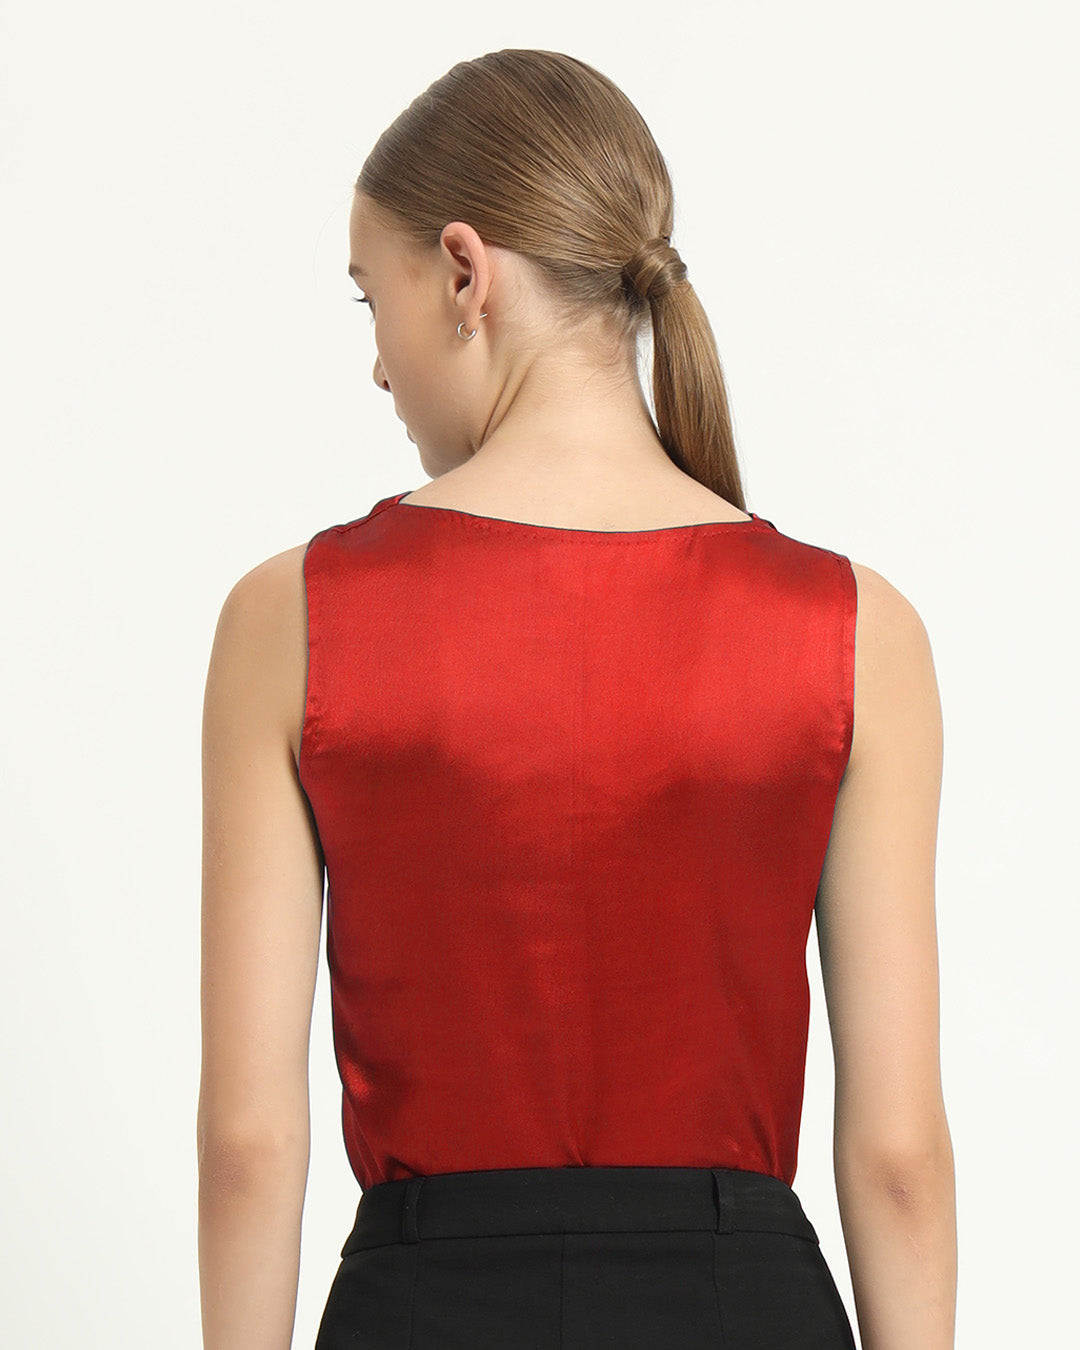 Satin Drapped Effect Scarlet Red Top